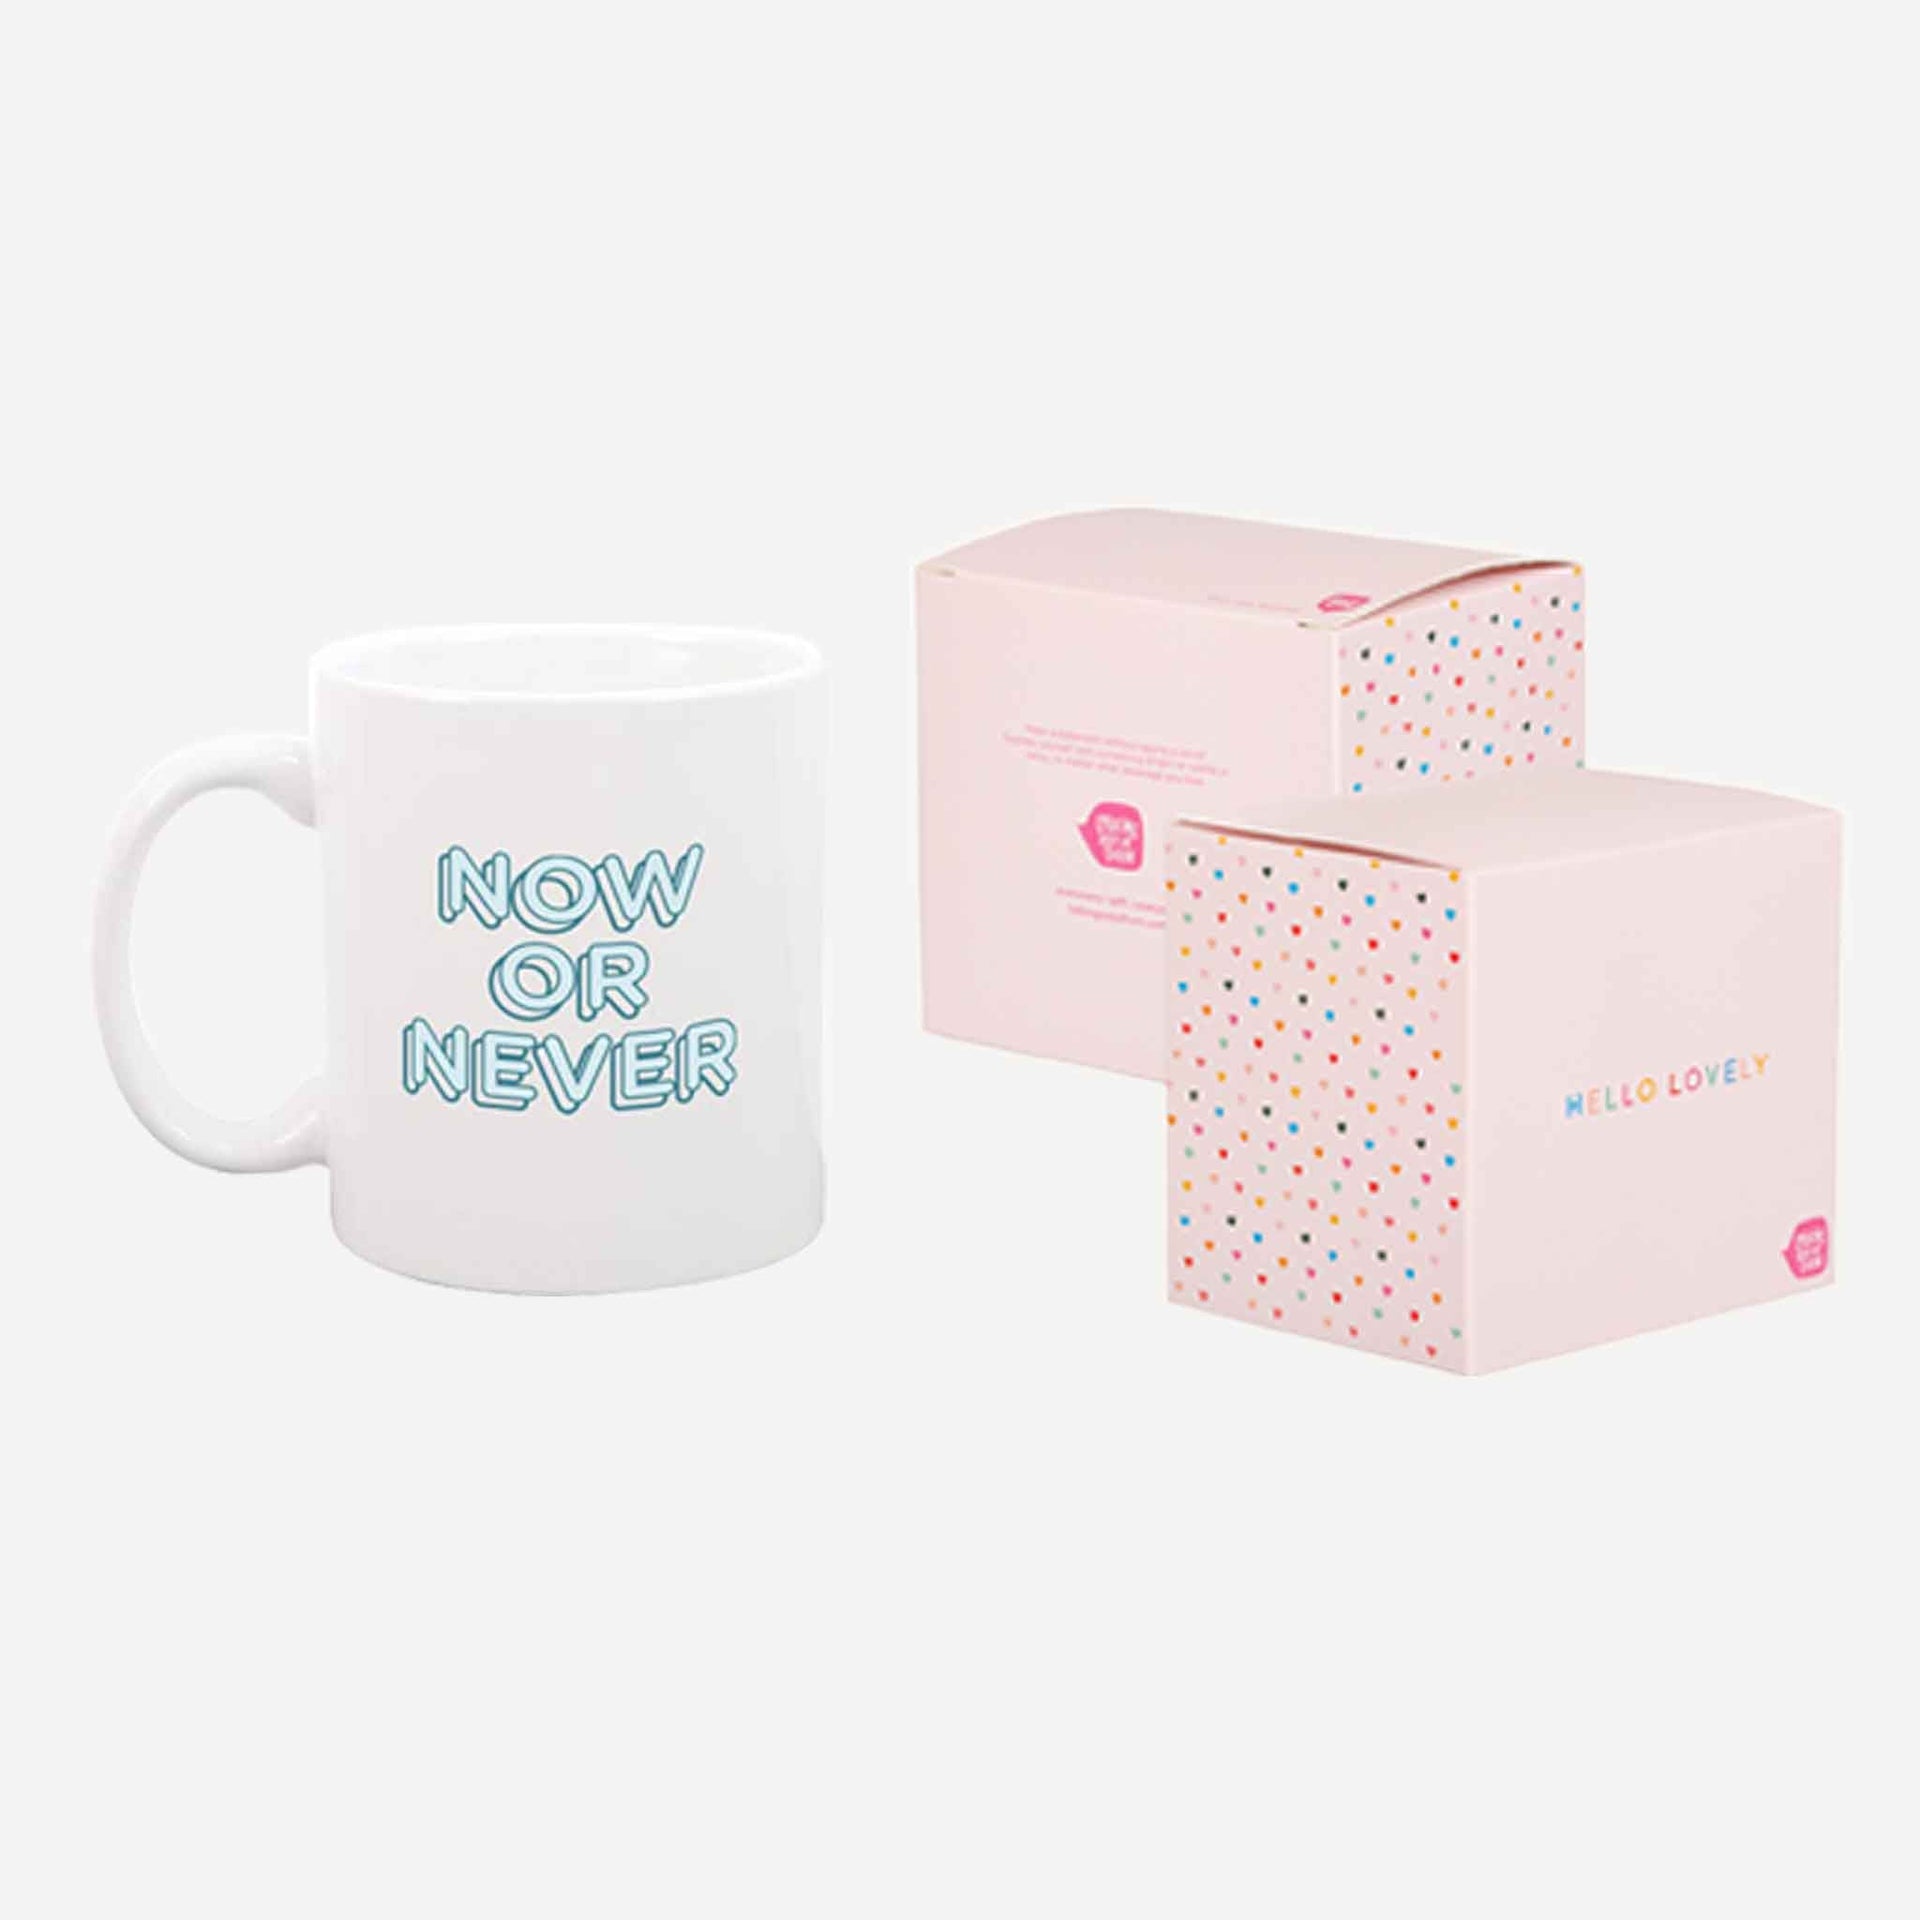 Now or Never Mug by Talking Out of Turn - Mod Peach